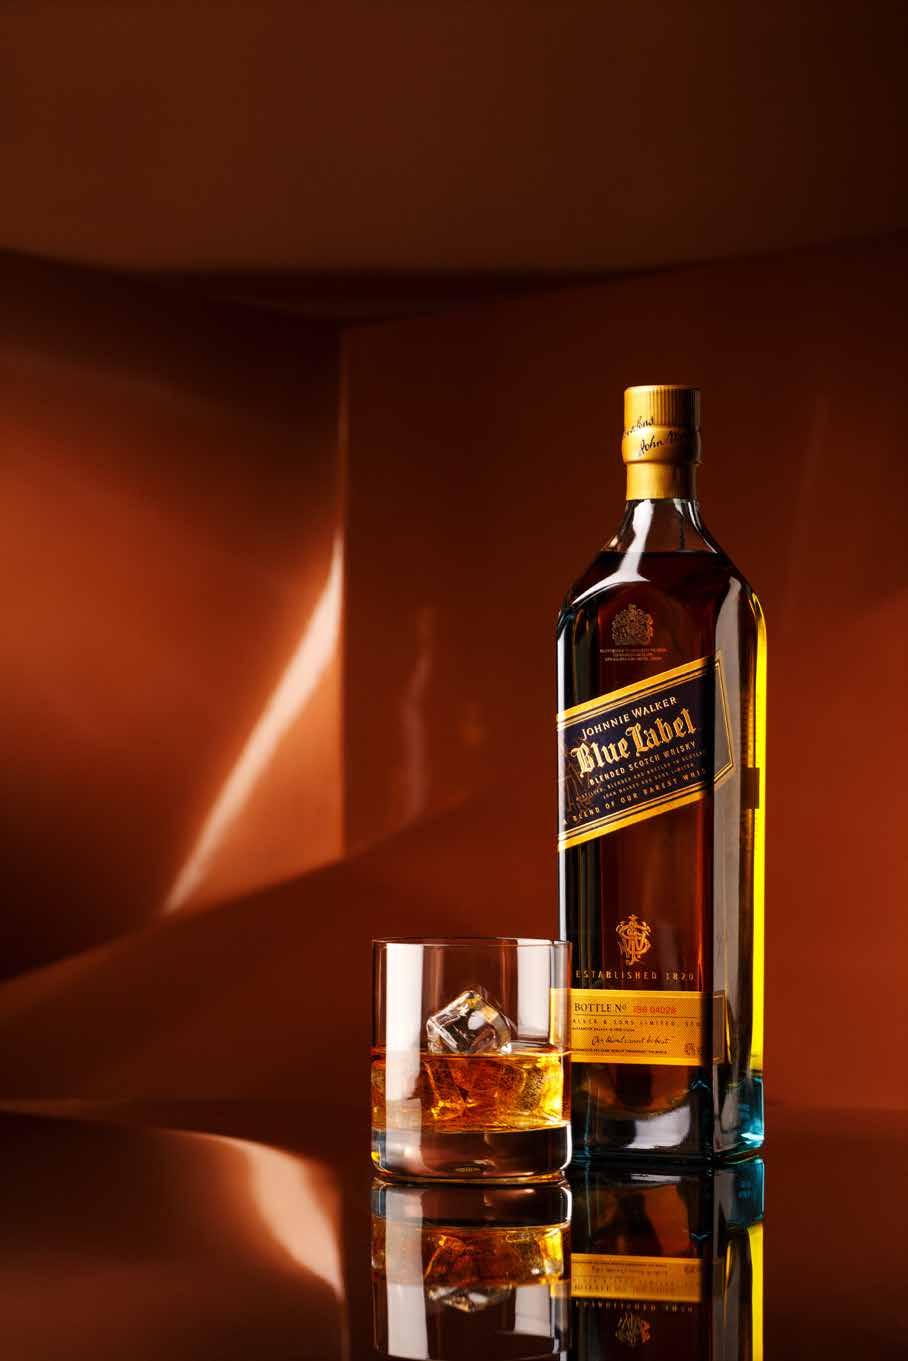 Step into an exclusive environment complete with a tasting bar where you can discover, appreciate and purchase a selection of the rarest John Walker & Sons